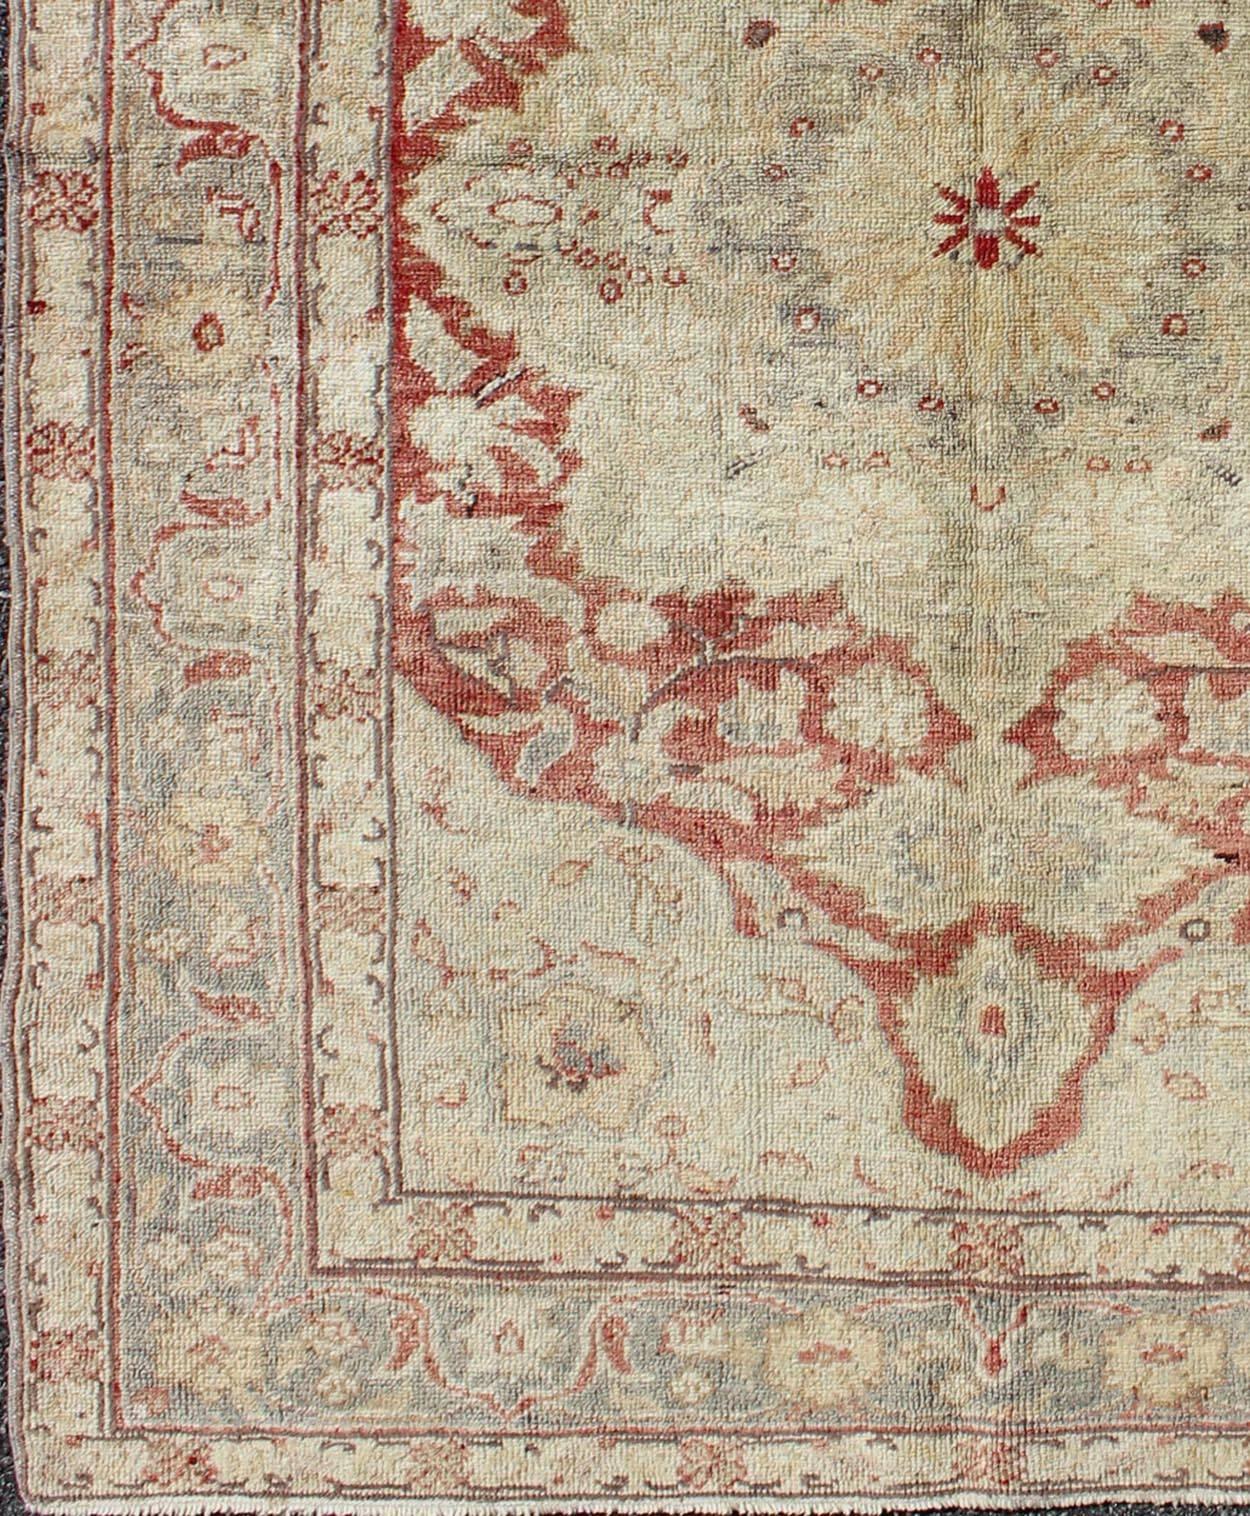 Fine Turkish Oushak Carpet with Center Medallion in Light Red 
rug/na-63630,  origin. turkey

This spectacular Turkish Oushak bears magnificent splendor indicative of royal tastes, which sought perfection in balance and palette. The center medallion